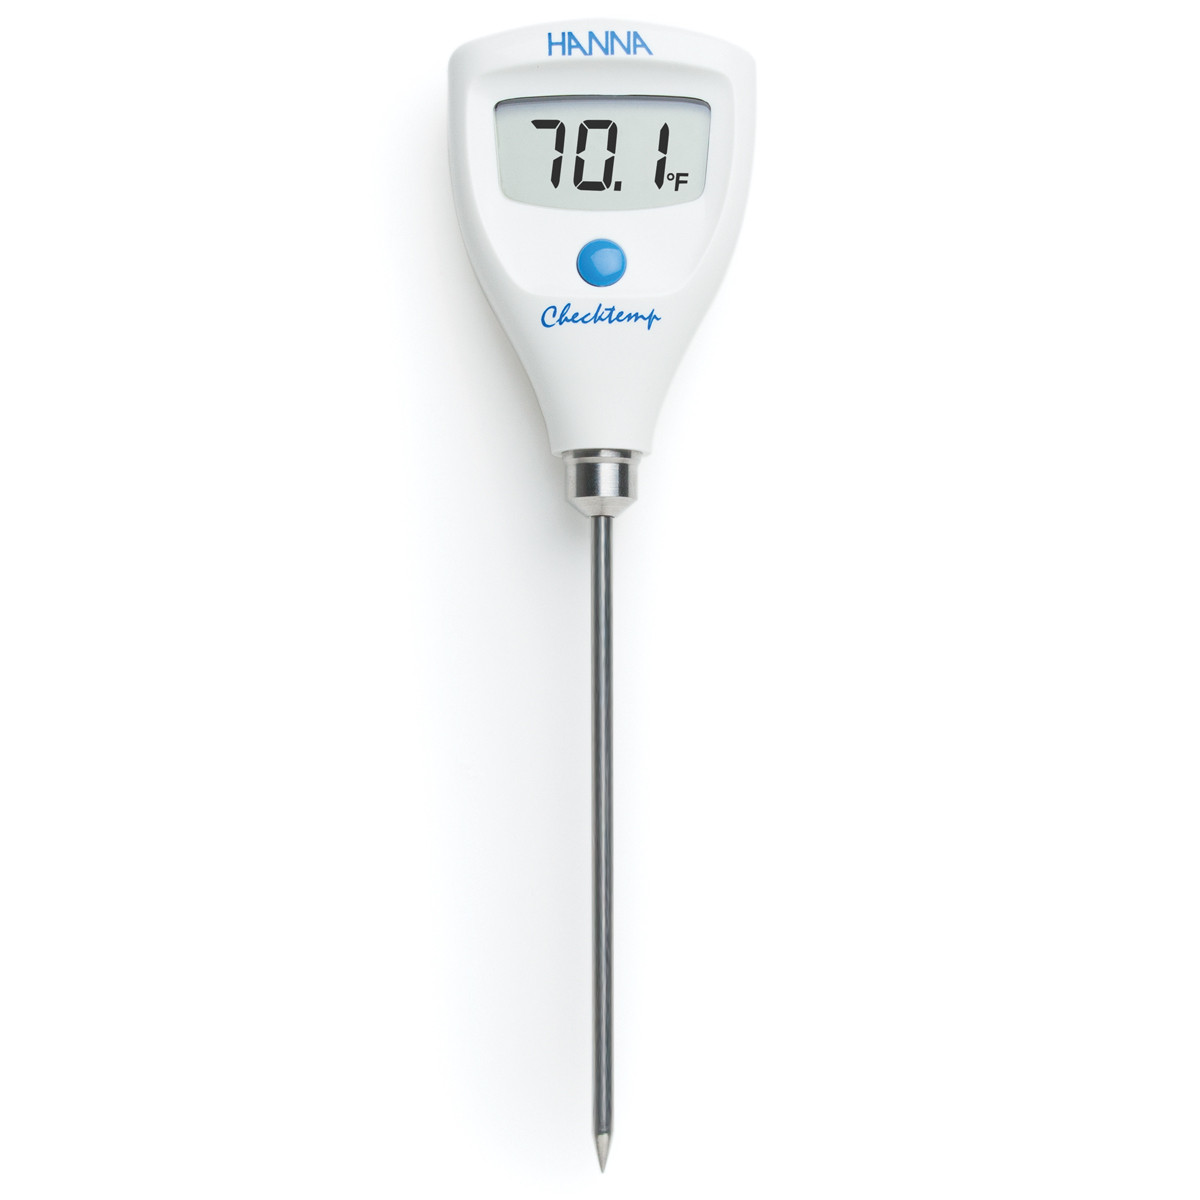 Checktemp® Digital Thermometer